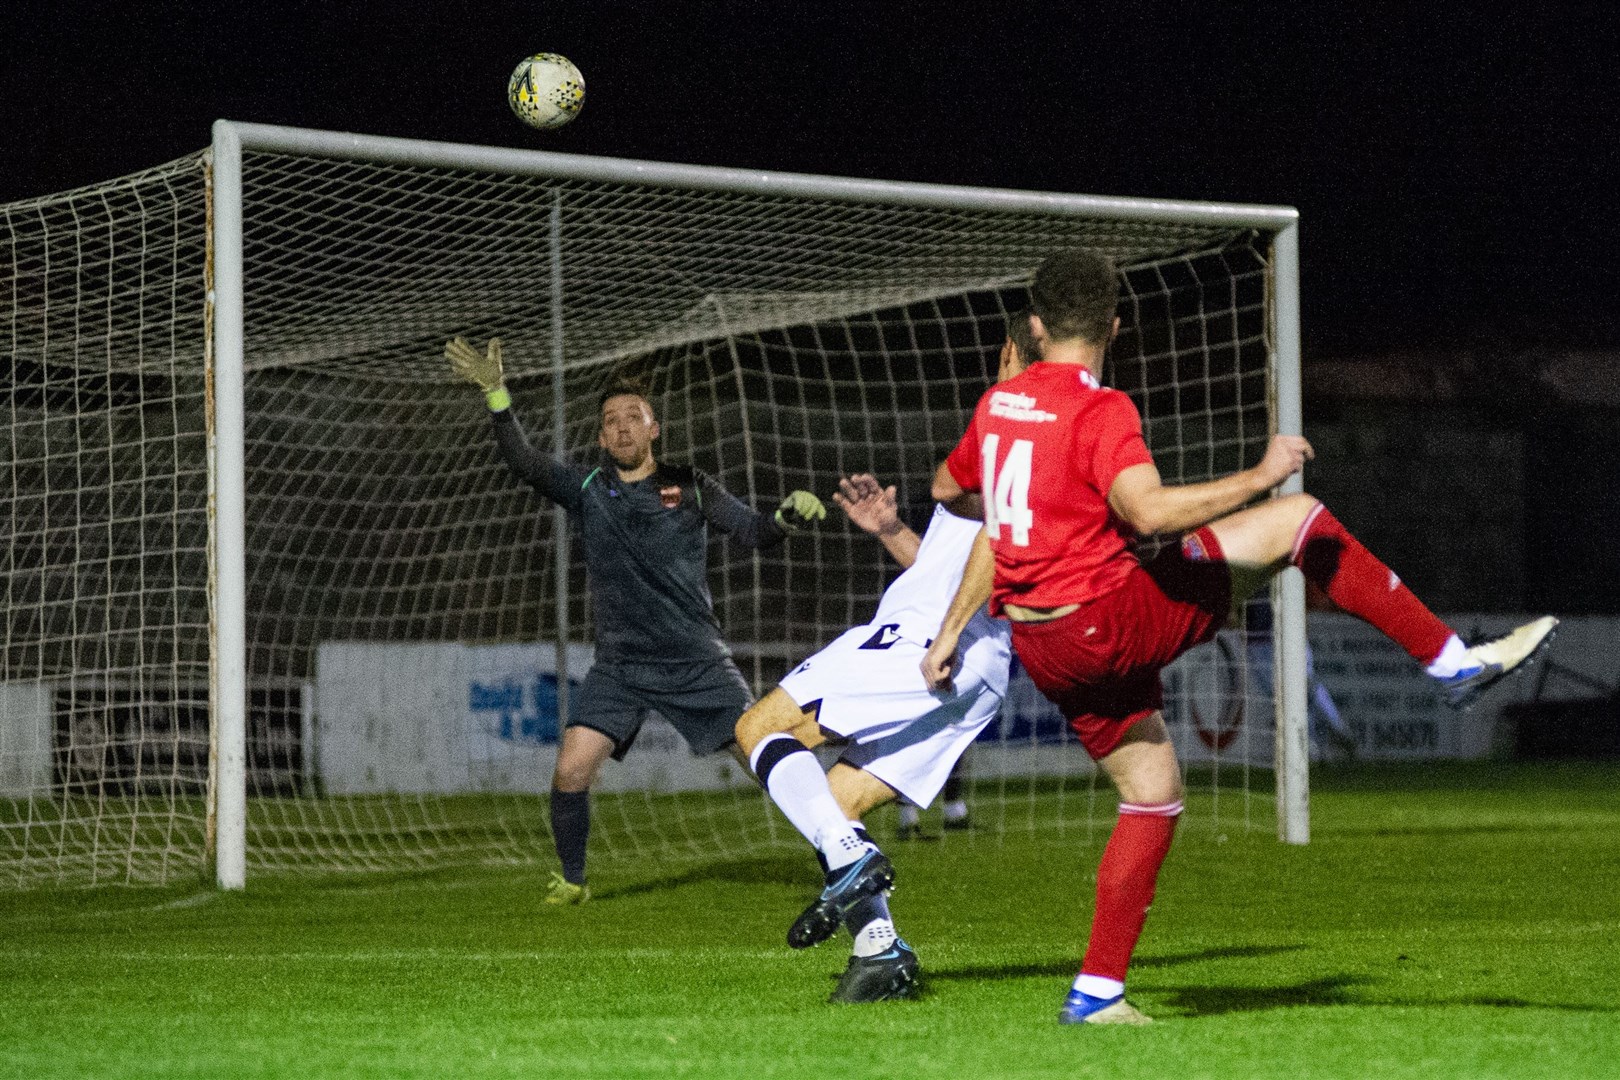 Lossiemouth midfielder Ryan Stuart watches his first half effort fly over the bar.